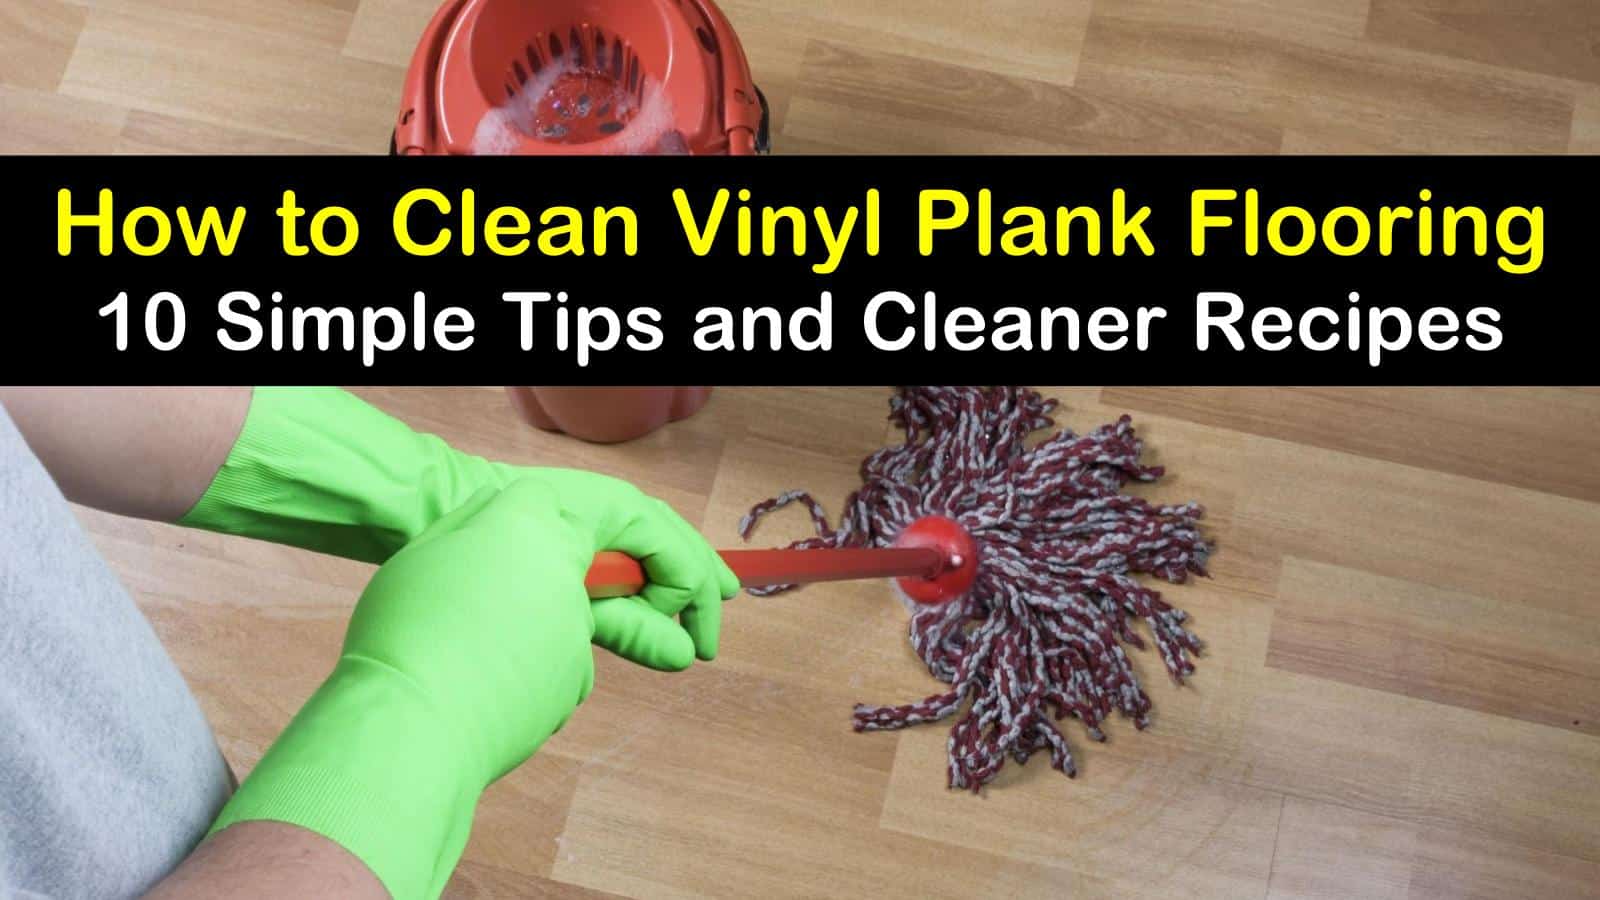 How To Clean Vinyl Plank Floors - Clean With Confidence